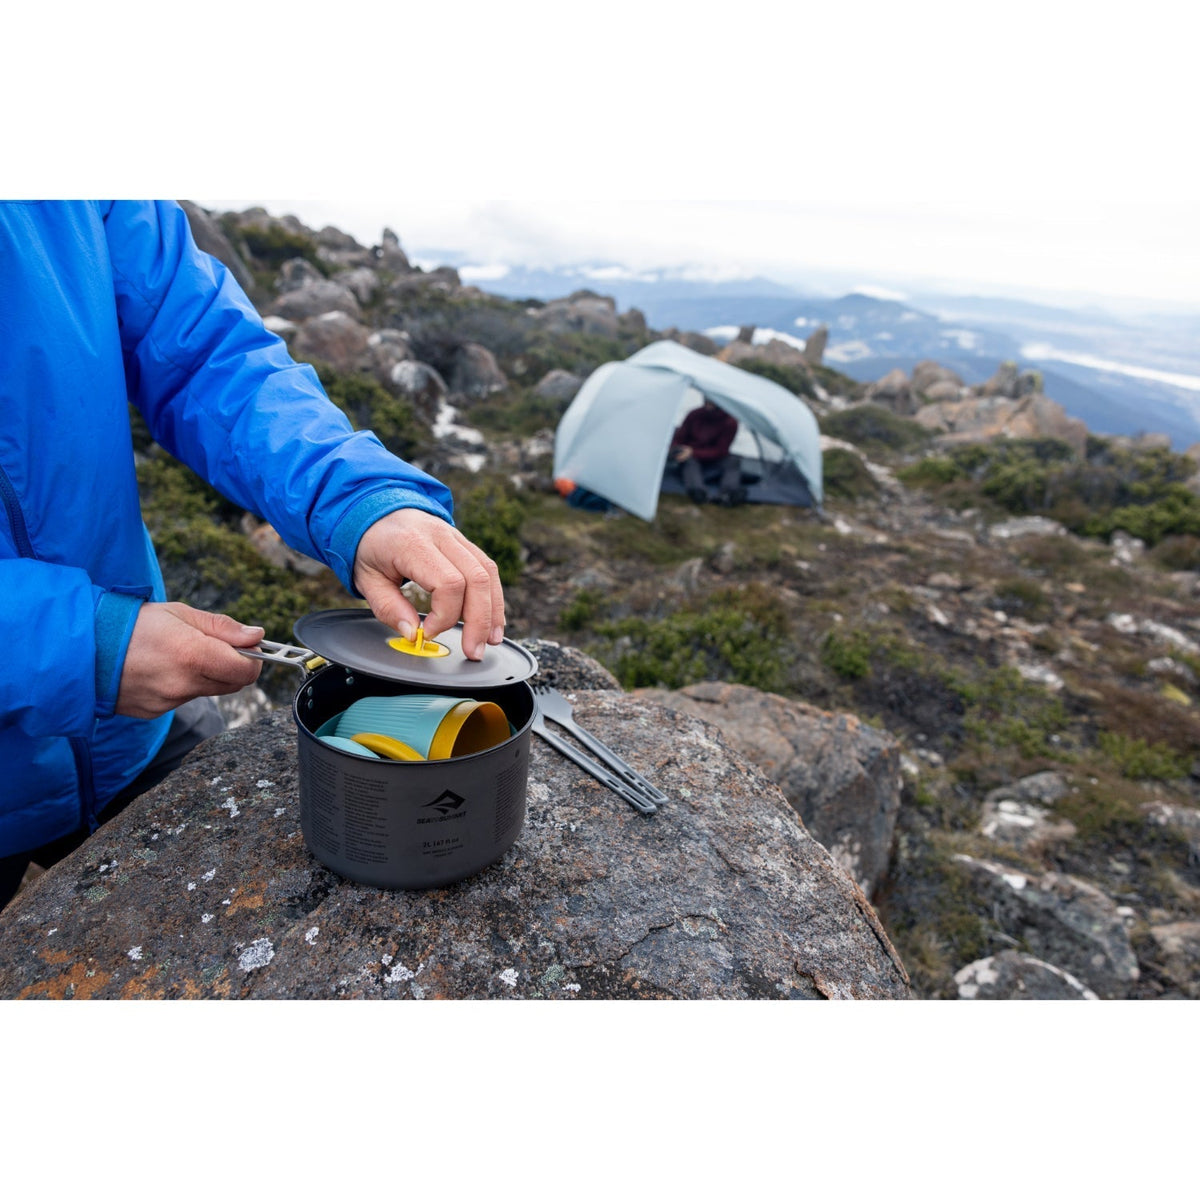 Sea to Summit Frontier Ultralight Two Pot Cook Set (2 Person, 6 Piece)